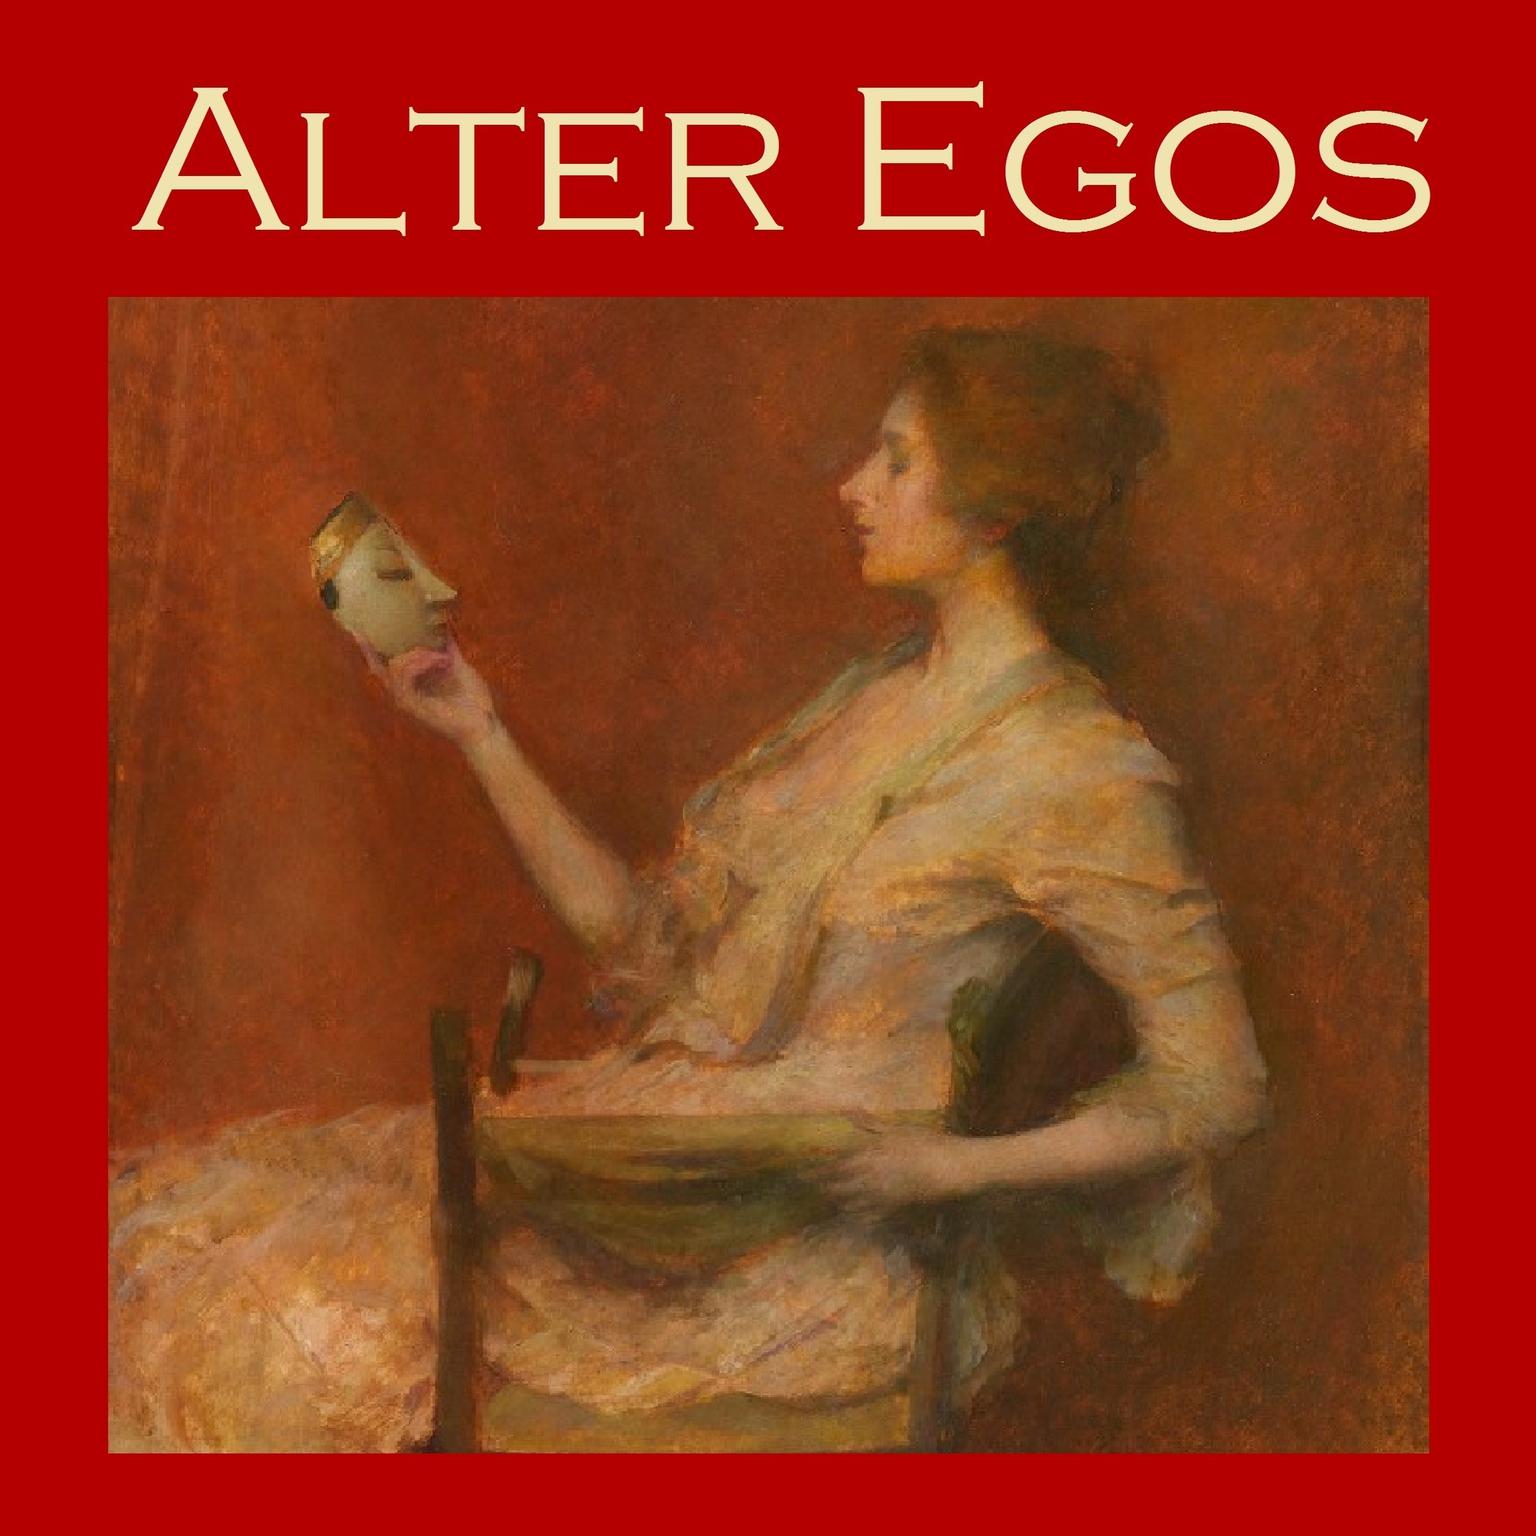 Alter Egos: Strange Stories of Split Personalities and Demonic Possession Audiobook, by various authors